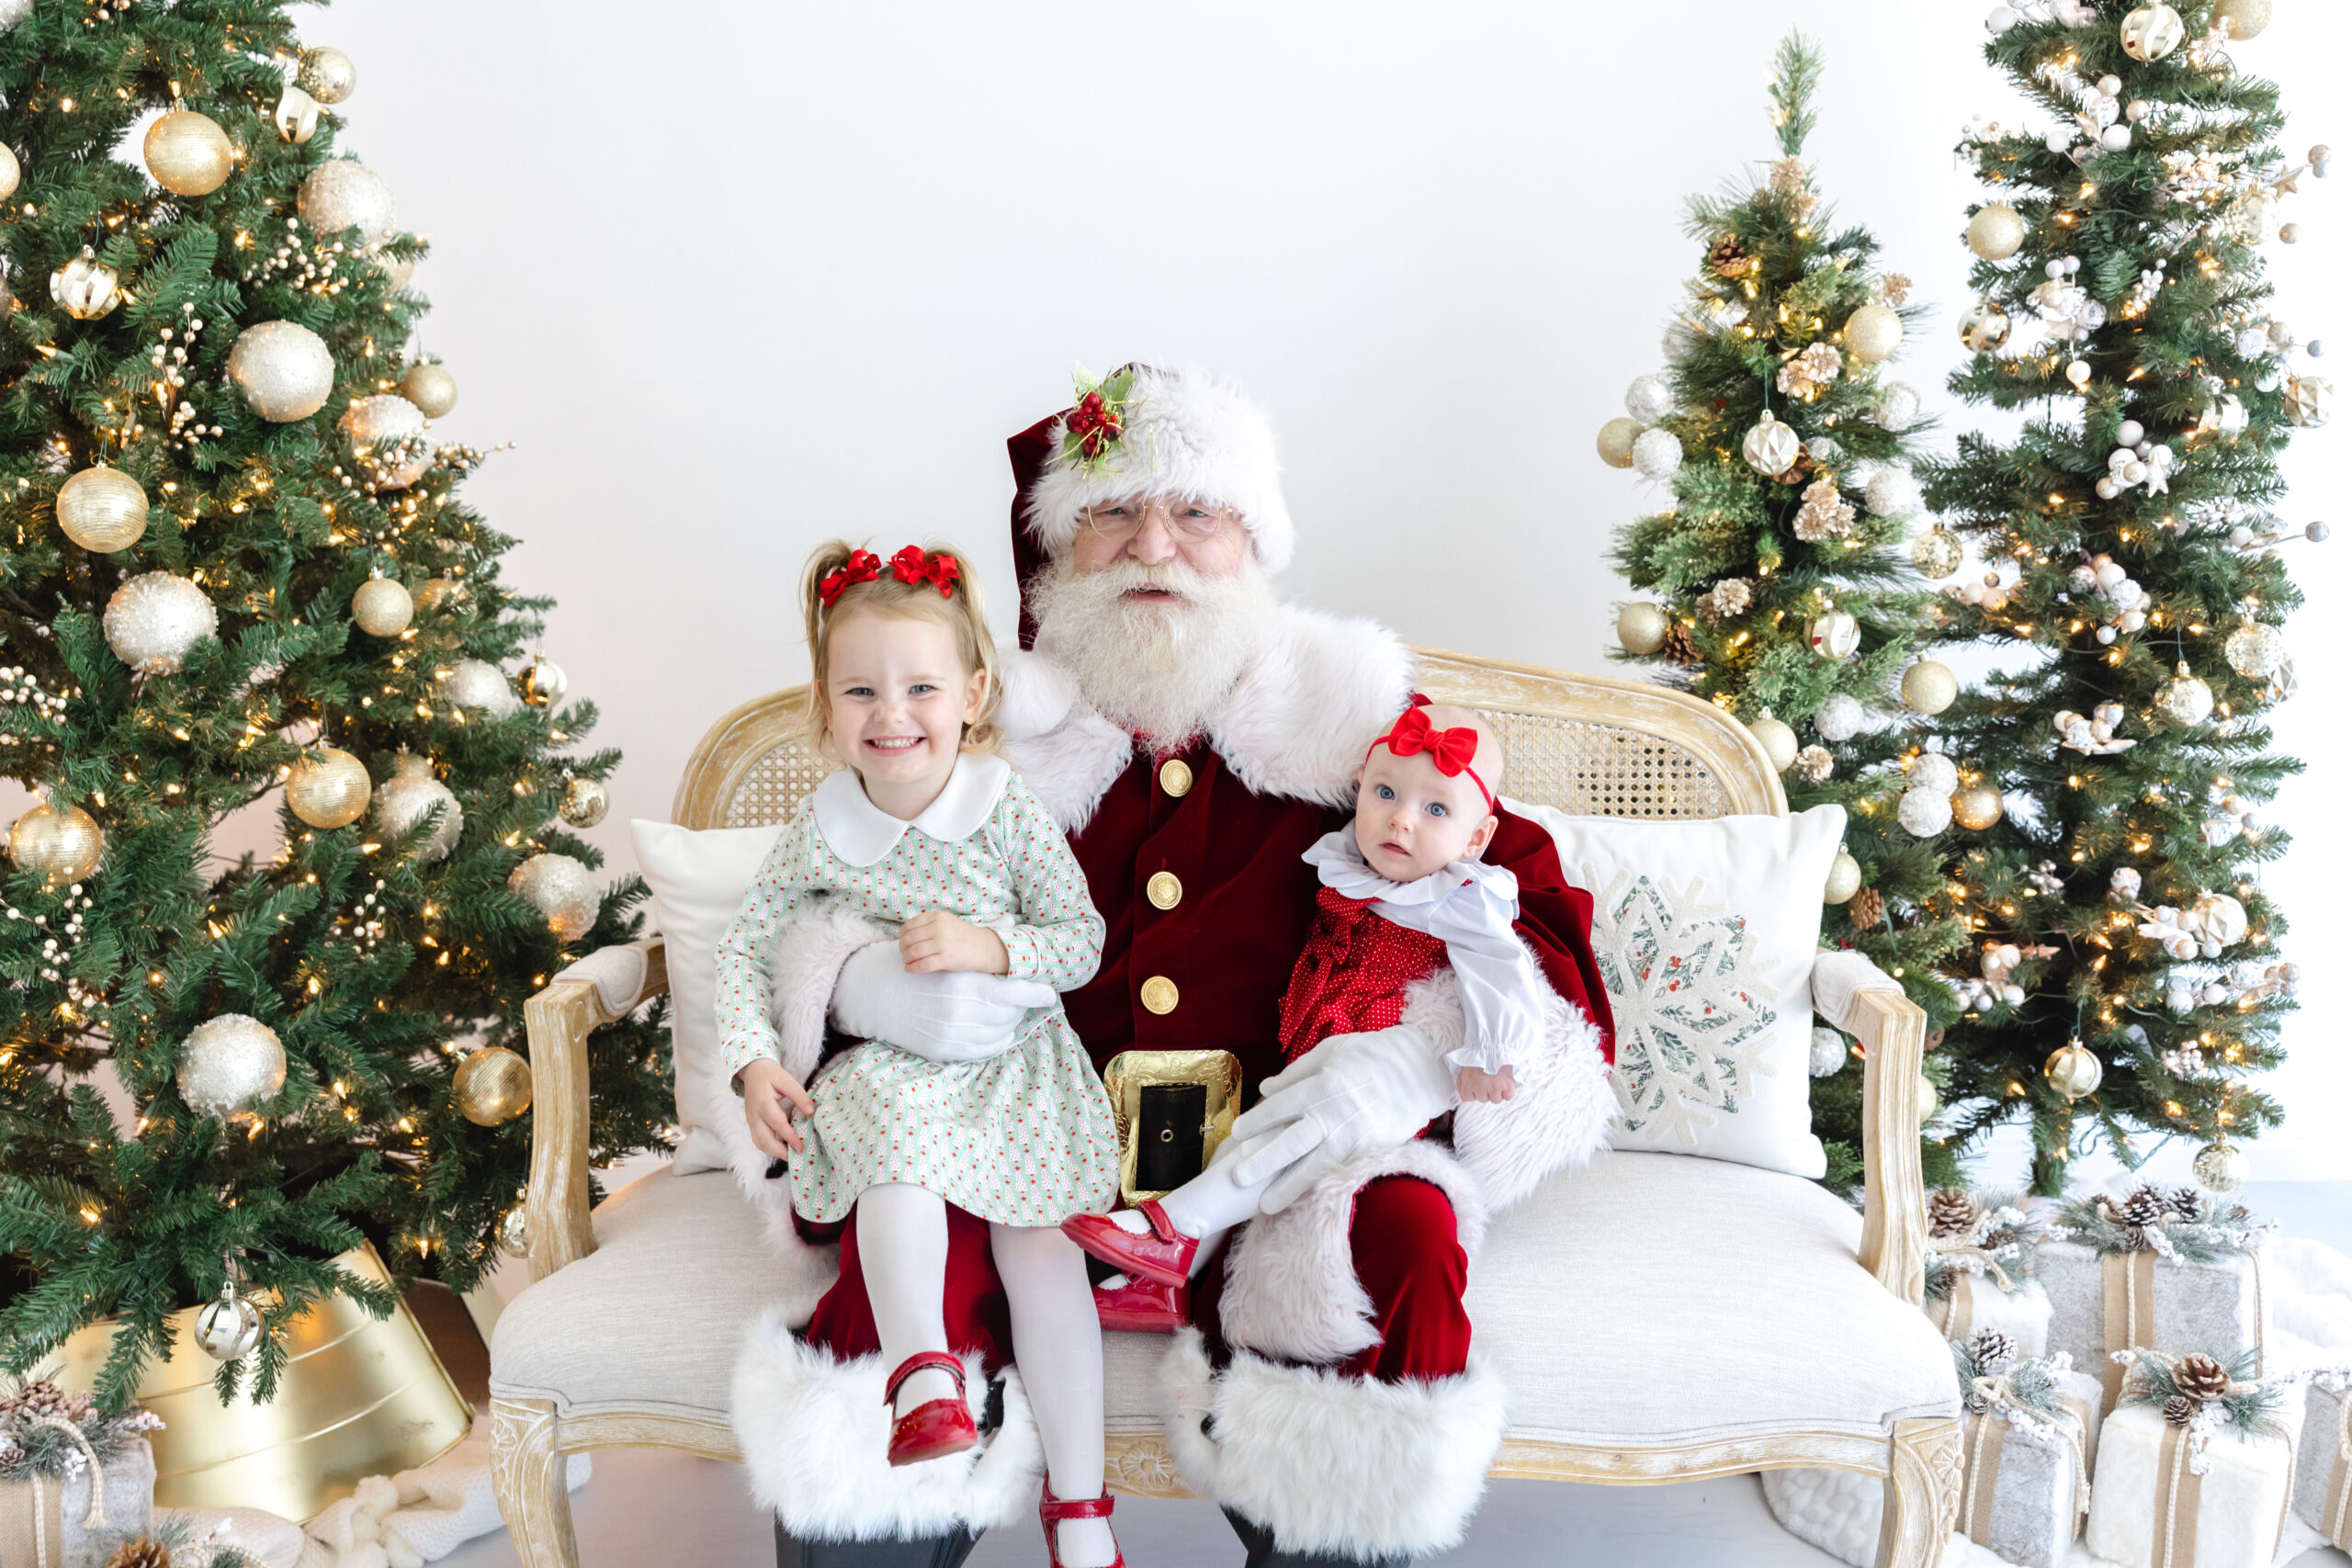 Two little girls sitting with santa during photo session | Image by Sana Ahmed